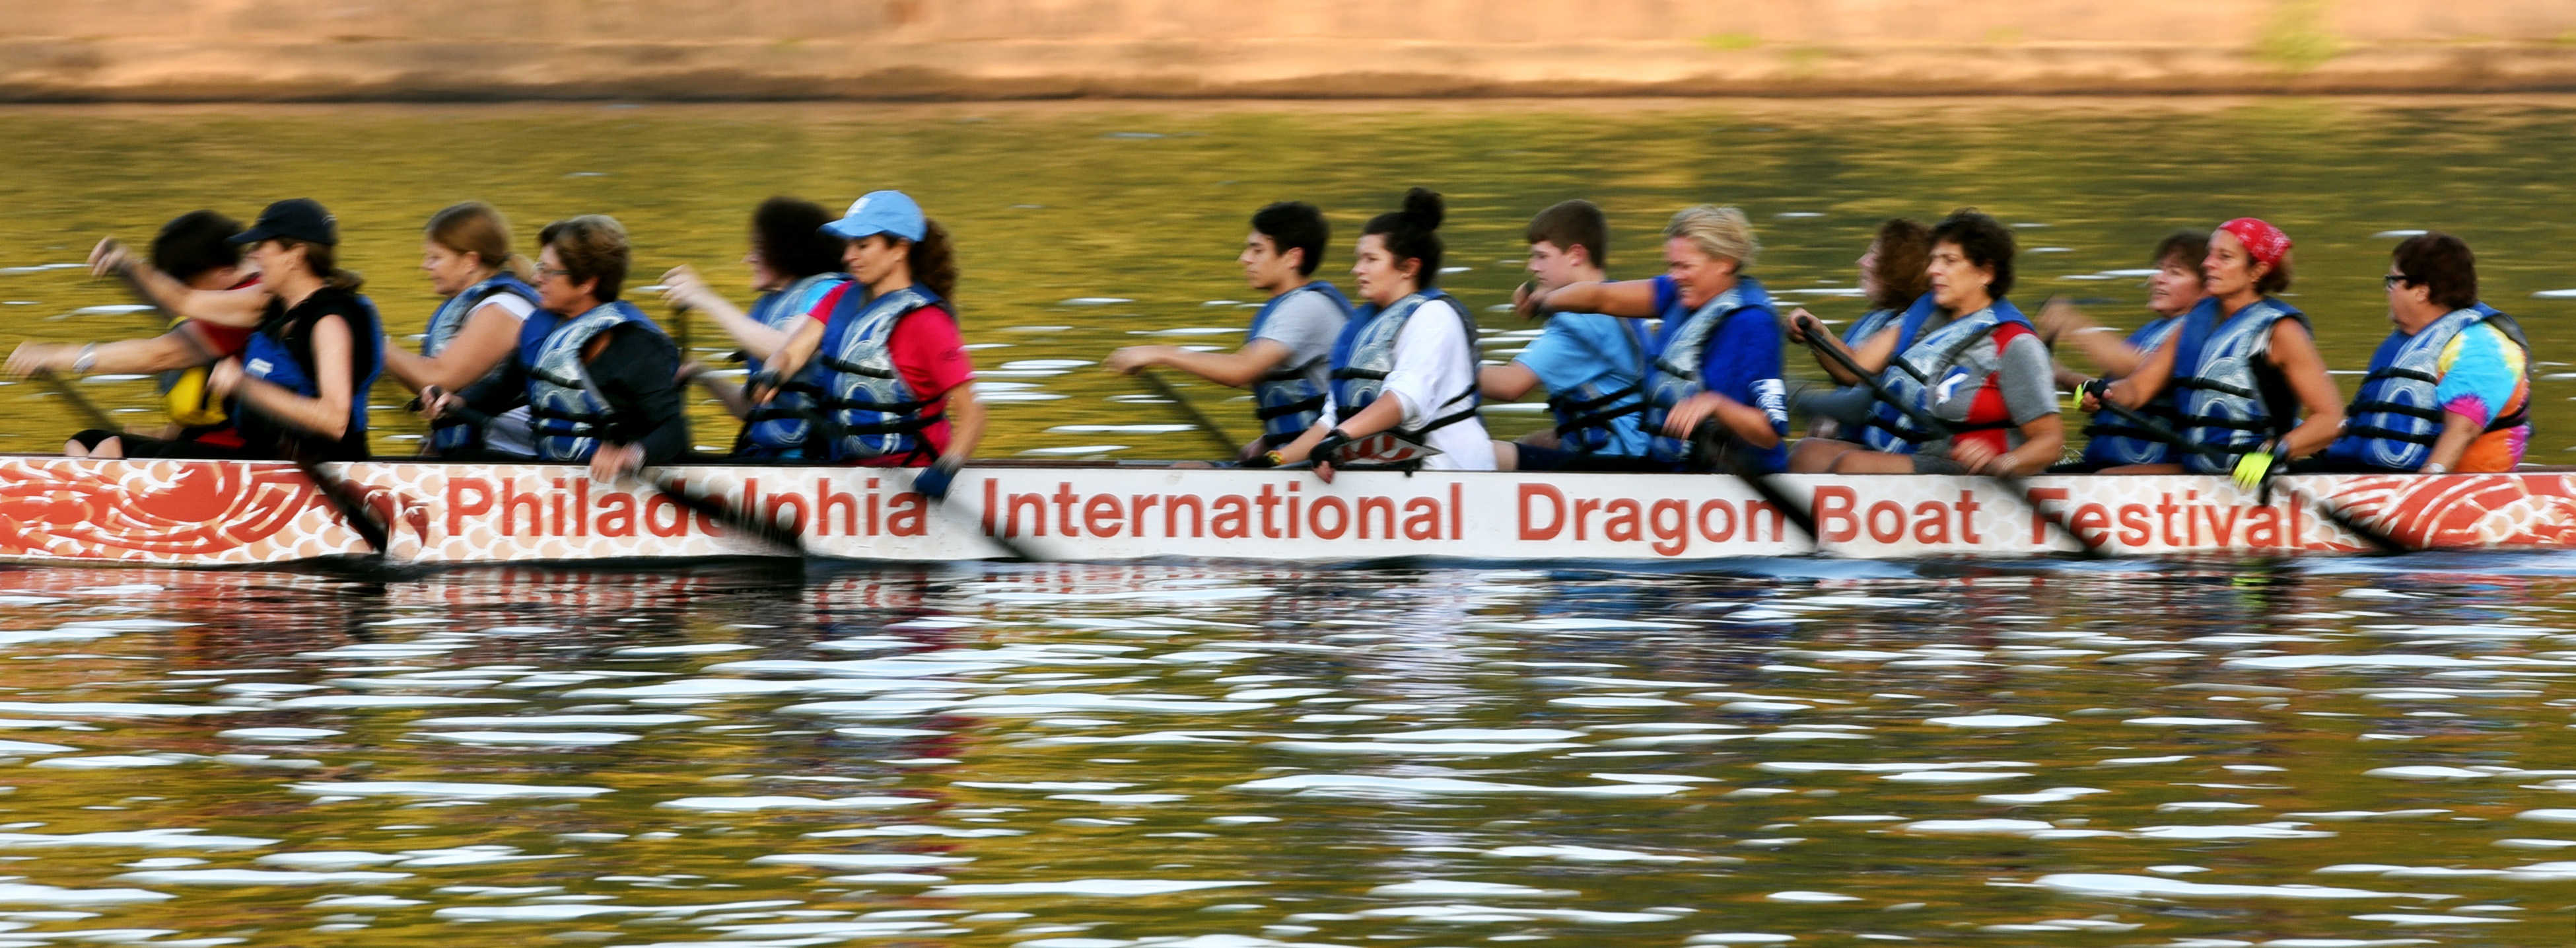 If it seems every American is doing dragon boating, you may be right